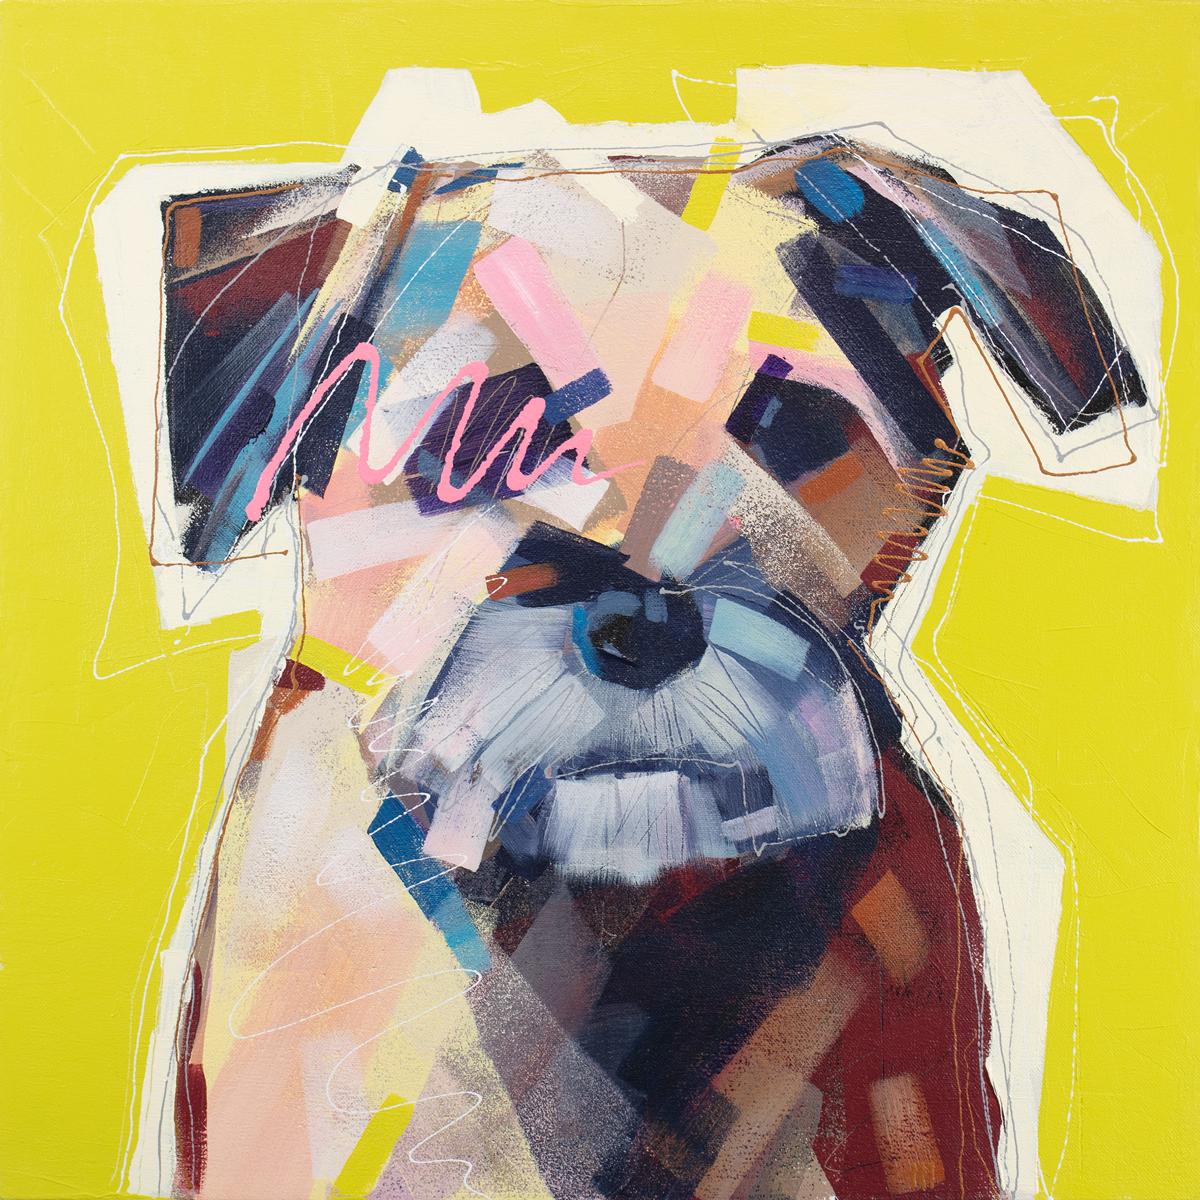 This abstracted painting of a dog by Russell Miyaki features a loose, energetic style and vibrant, colorful palette. The artist layers wide brush strokes and thin lines to create the dog's form from the shoulders up in warm tones and contrasting